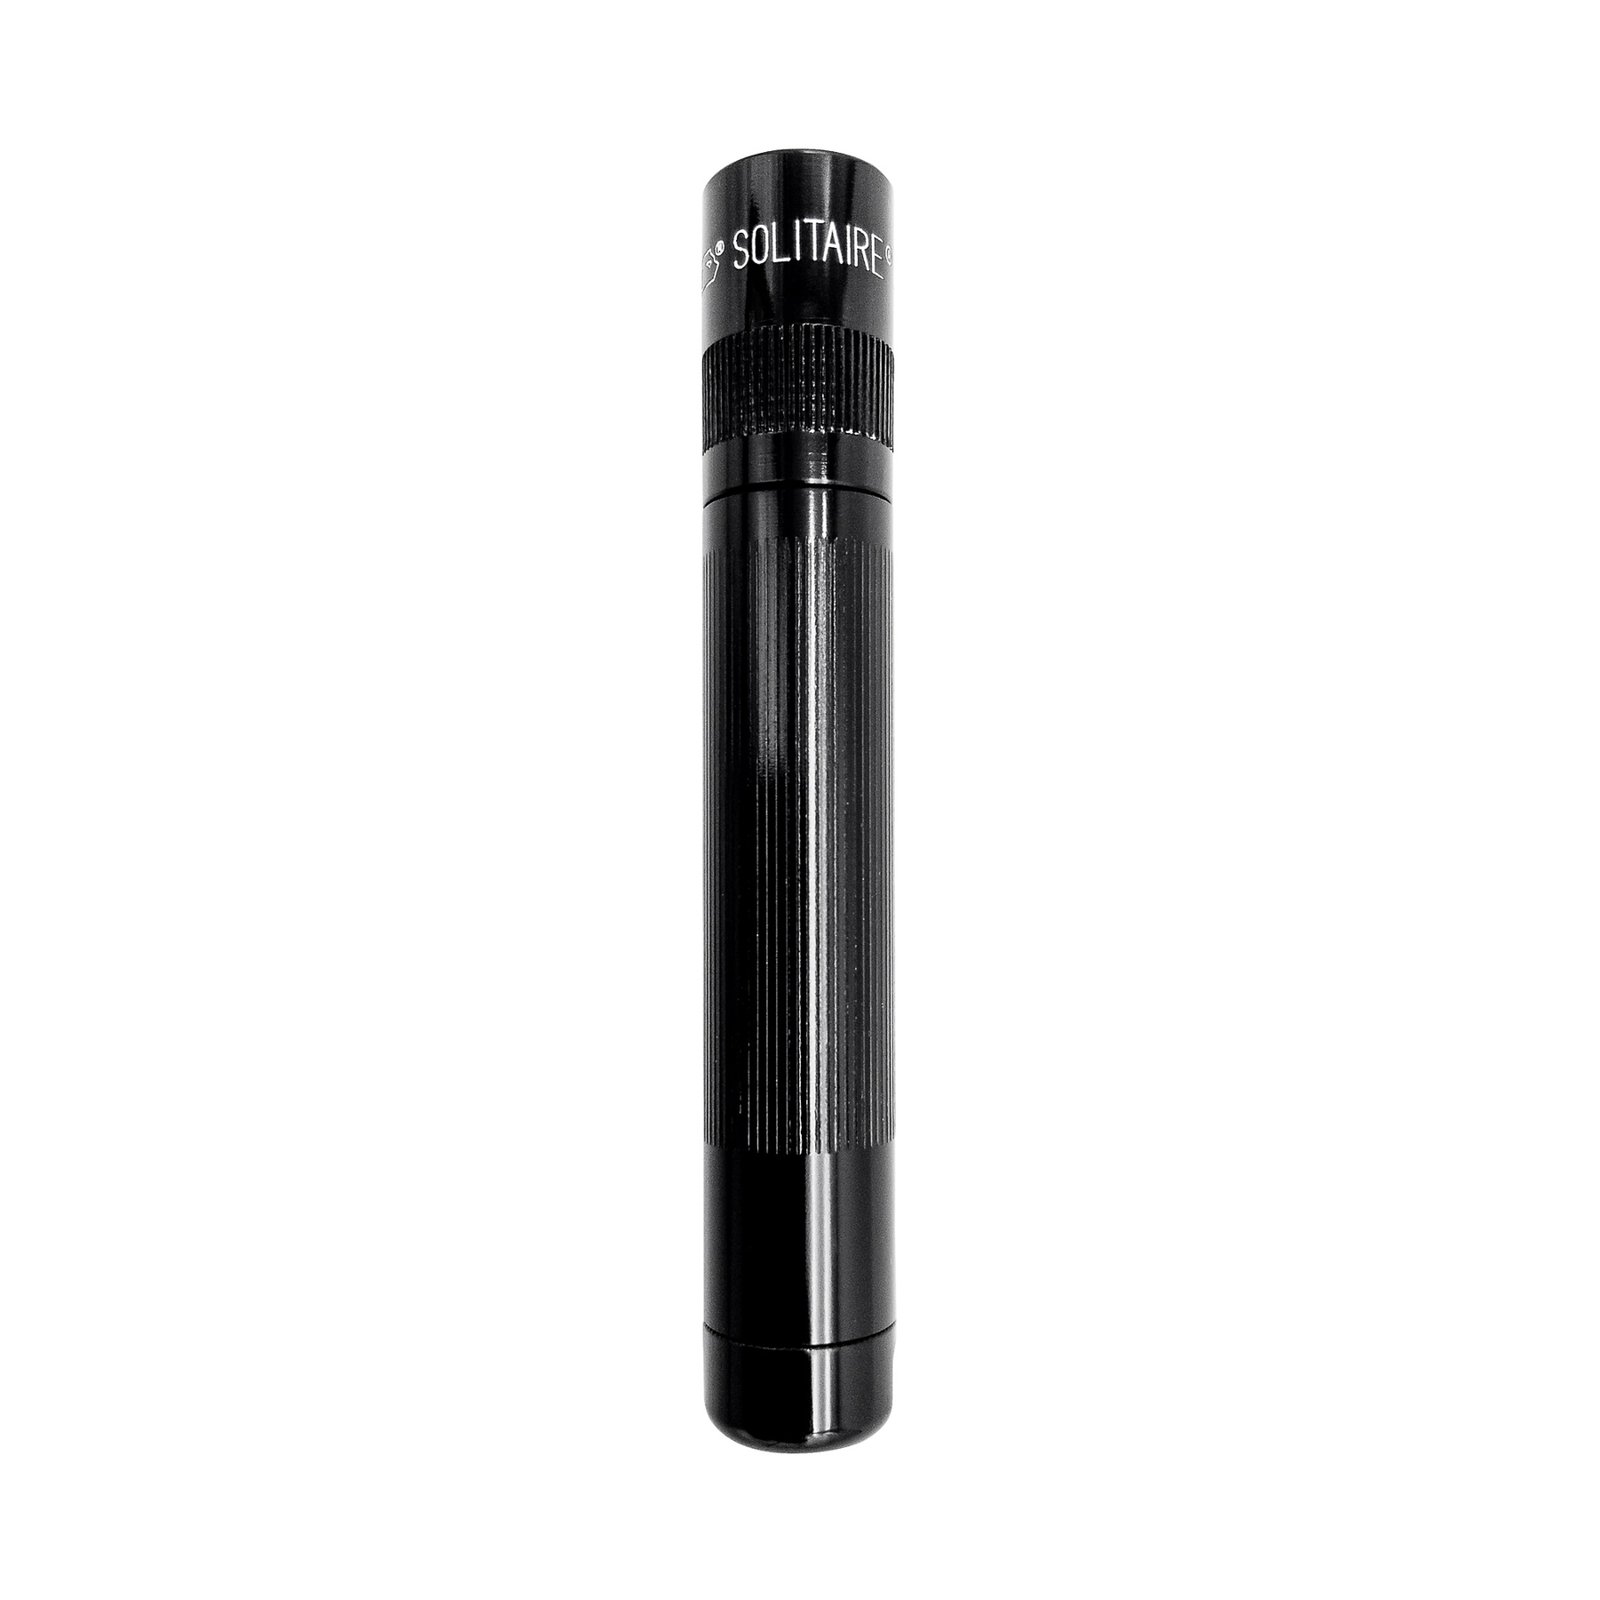 Linterna LED Maglite Solitaire, 1 Cell AAA, Box, negro